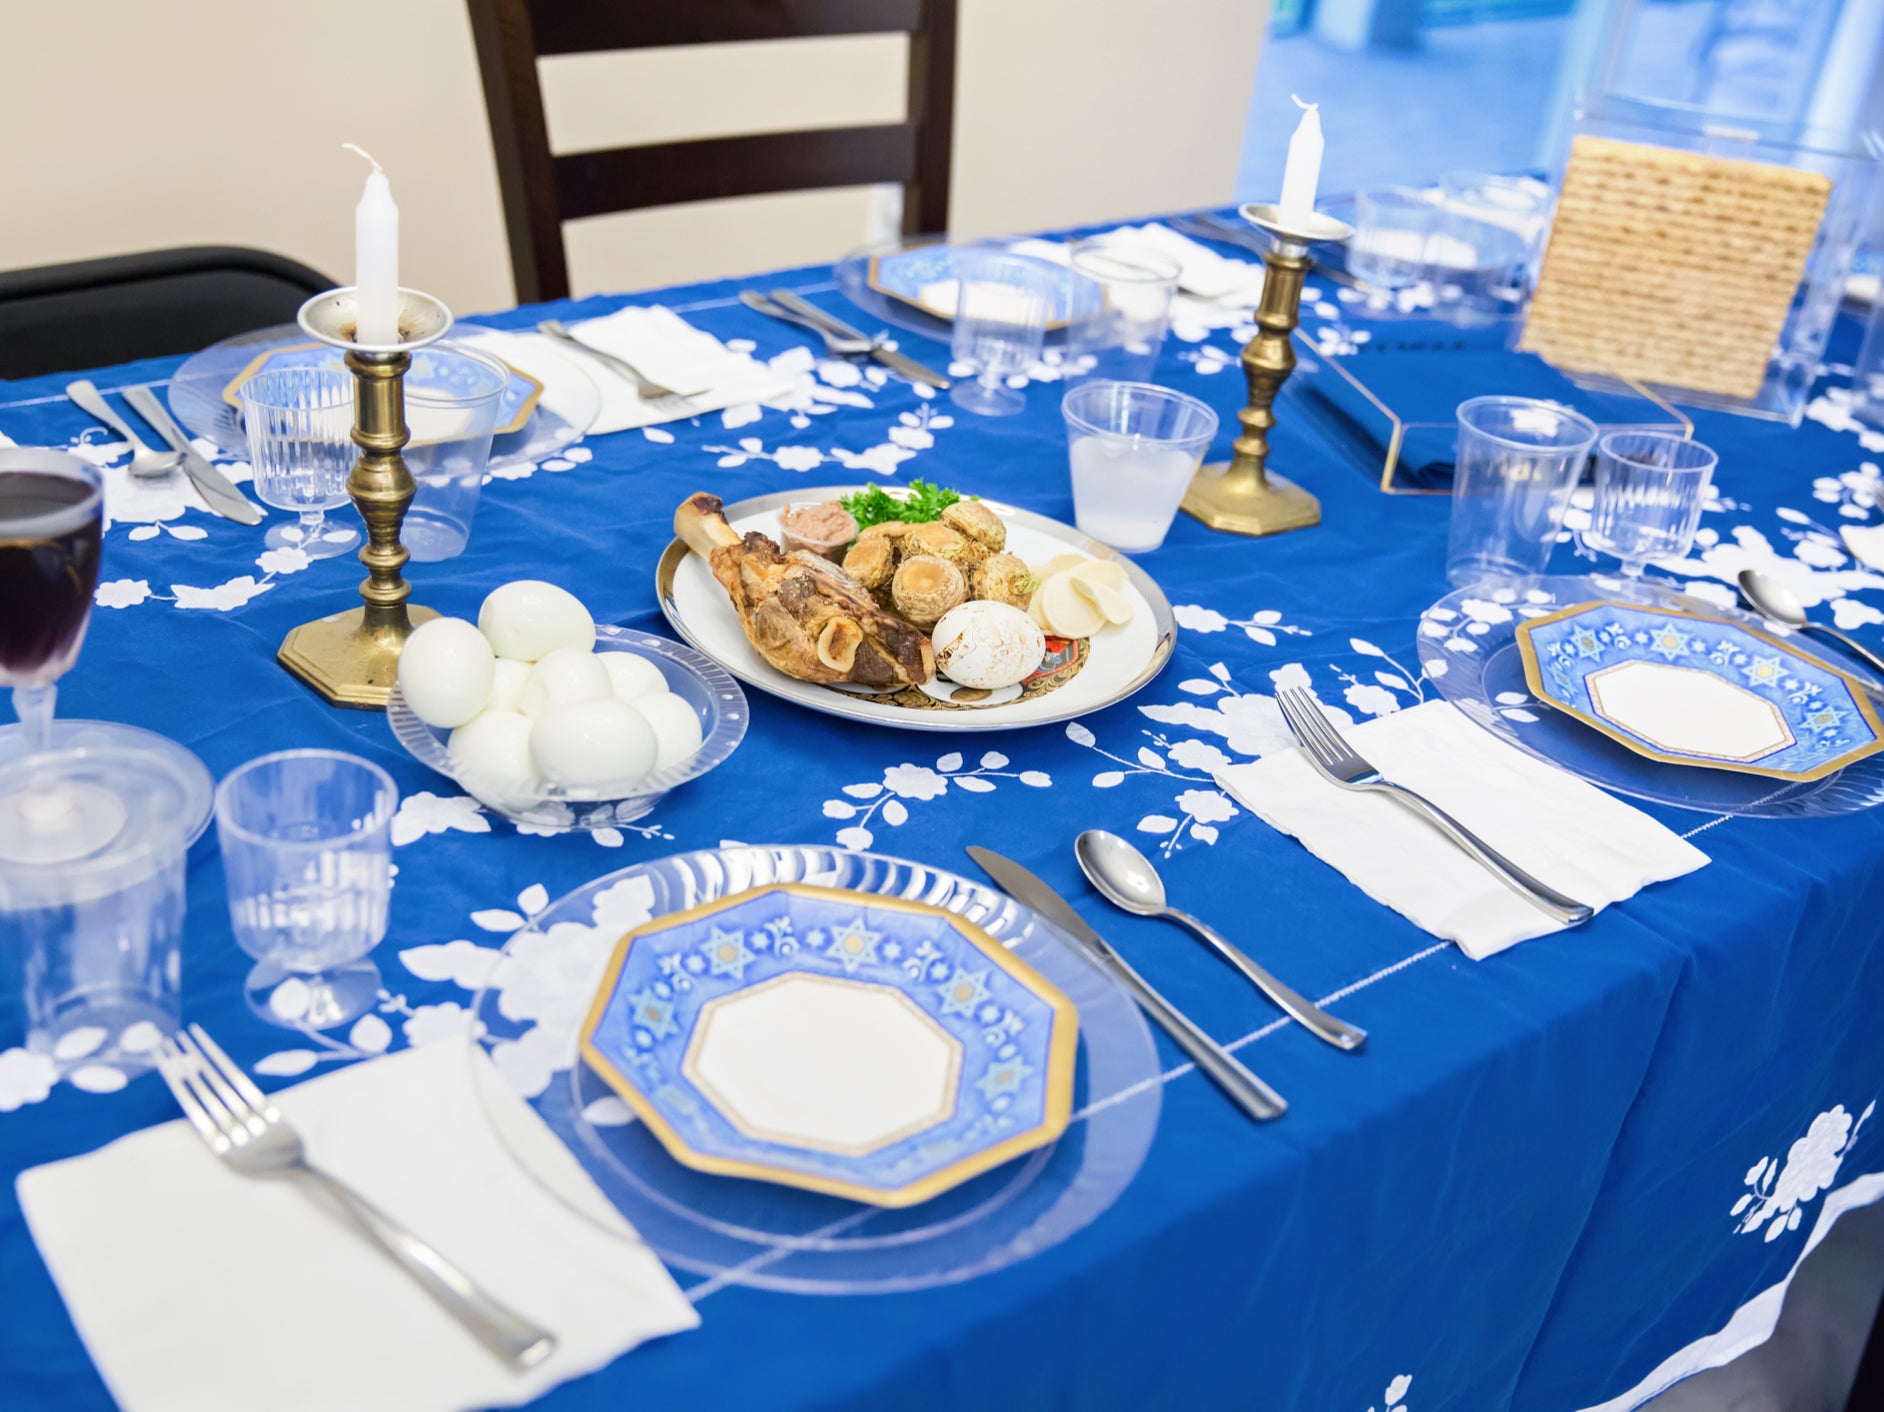 Traditional Passover meal features lamb